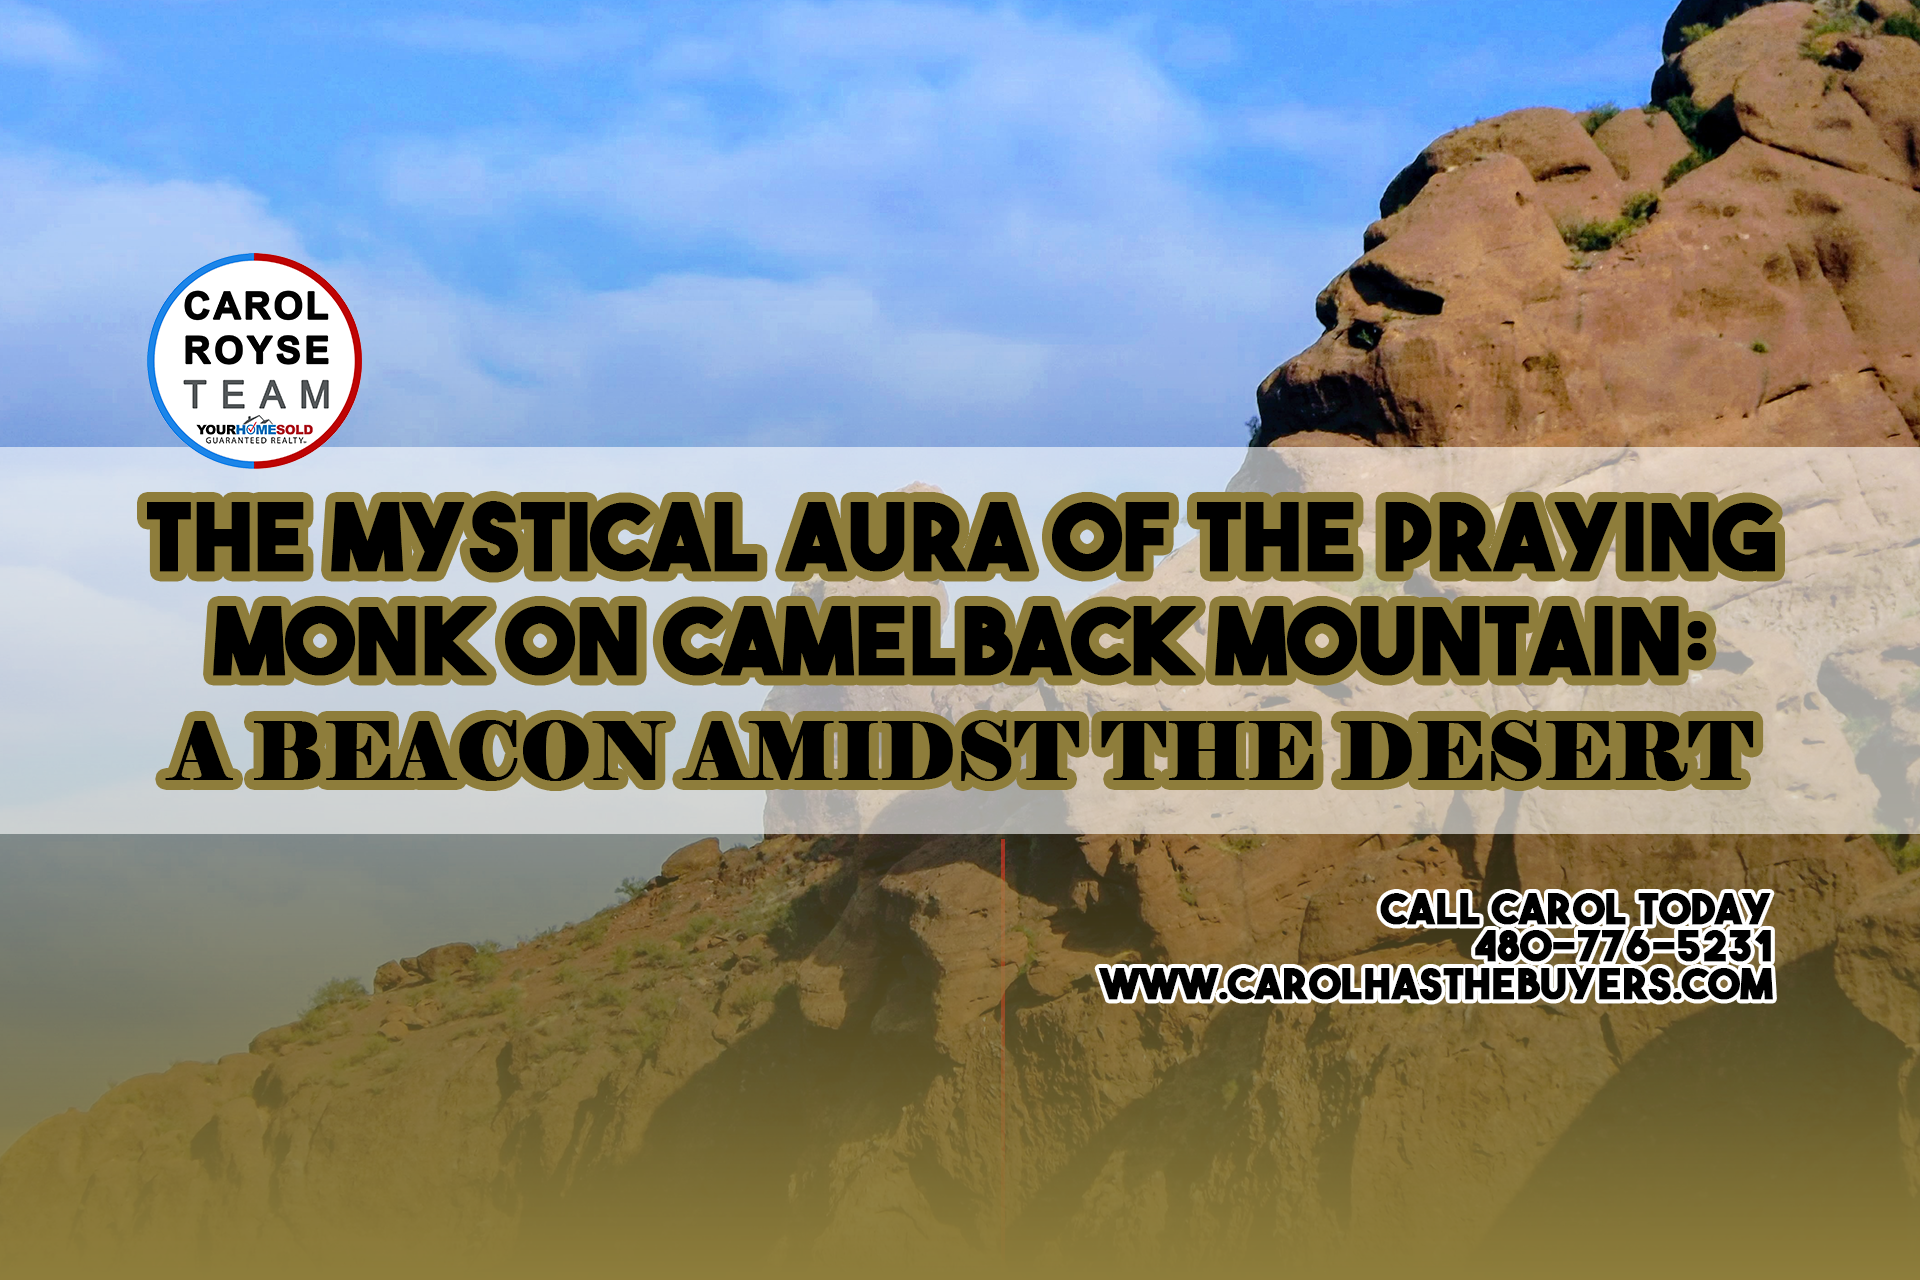 The Mystical Aura of the Praying Monk on Camelback Mountain: A Beacon Amidst the Desert